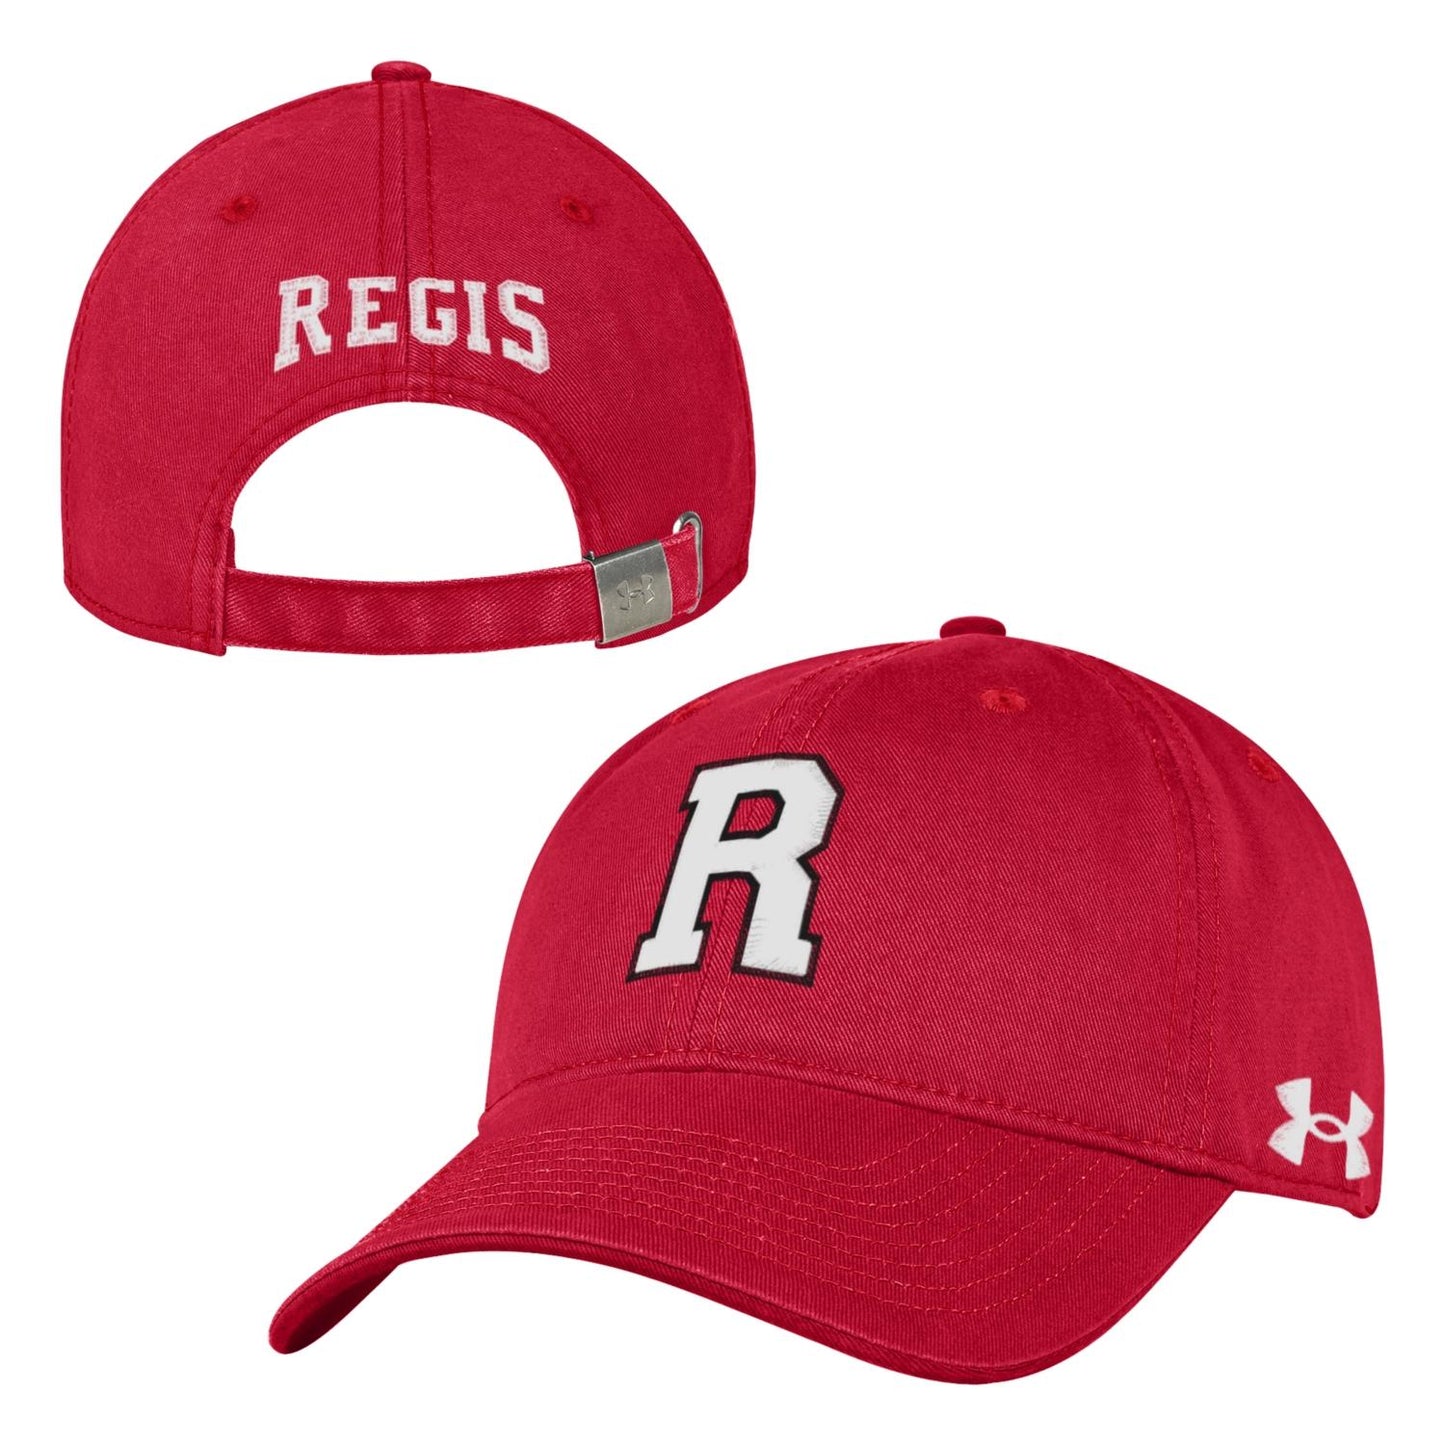 Baseball Cap - Under Armour Red with R